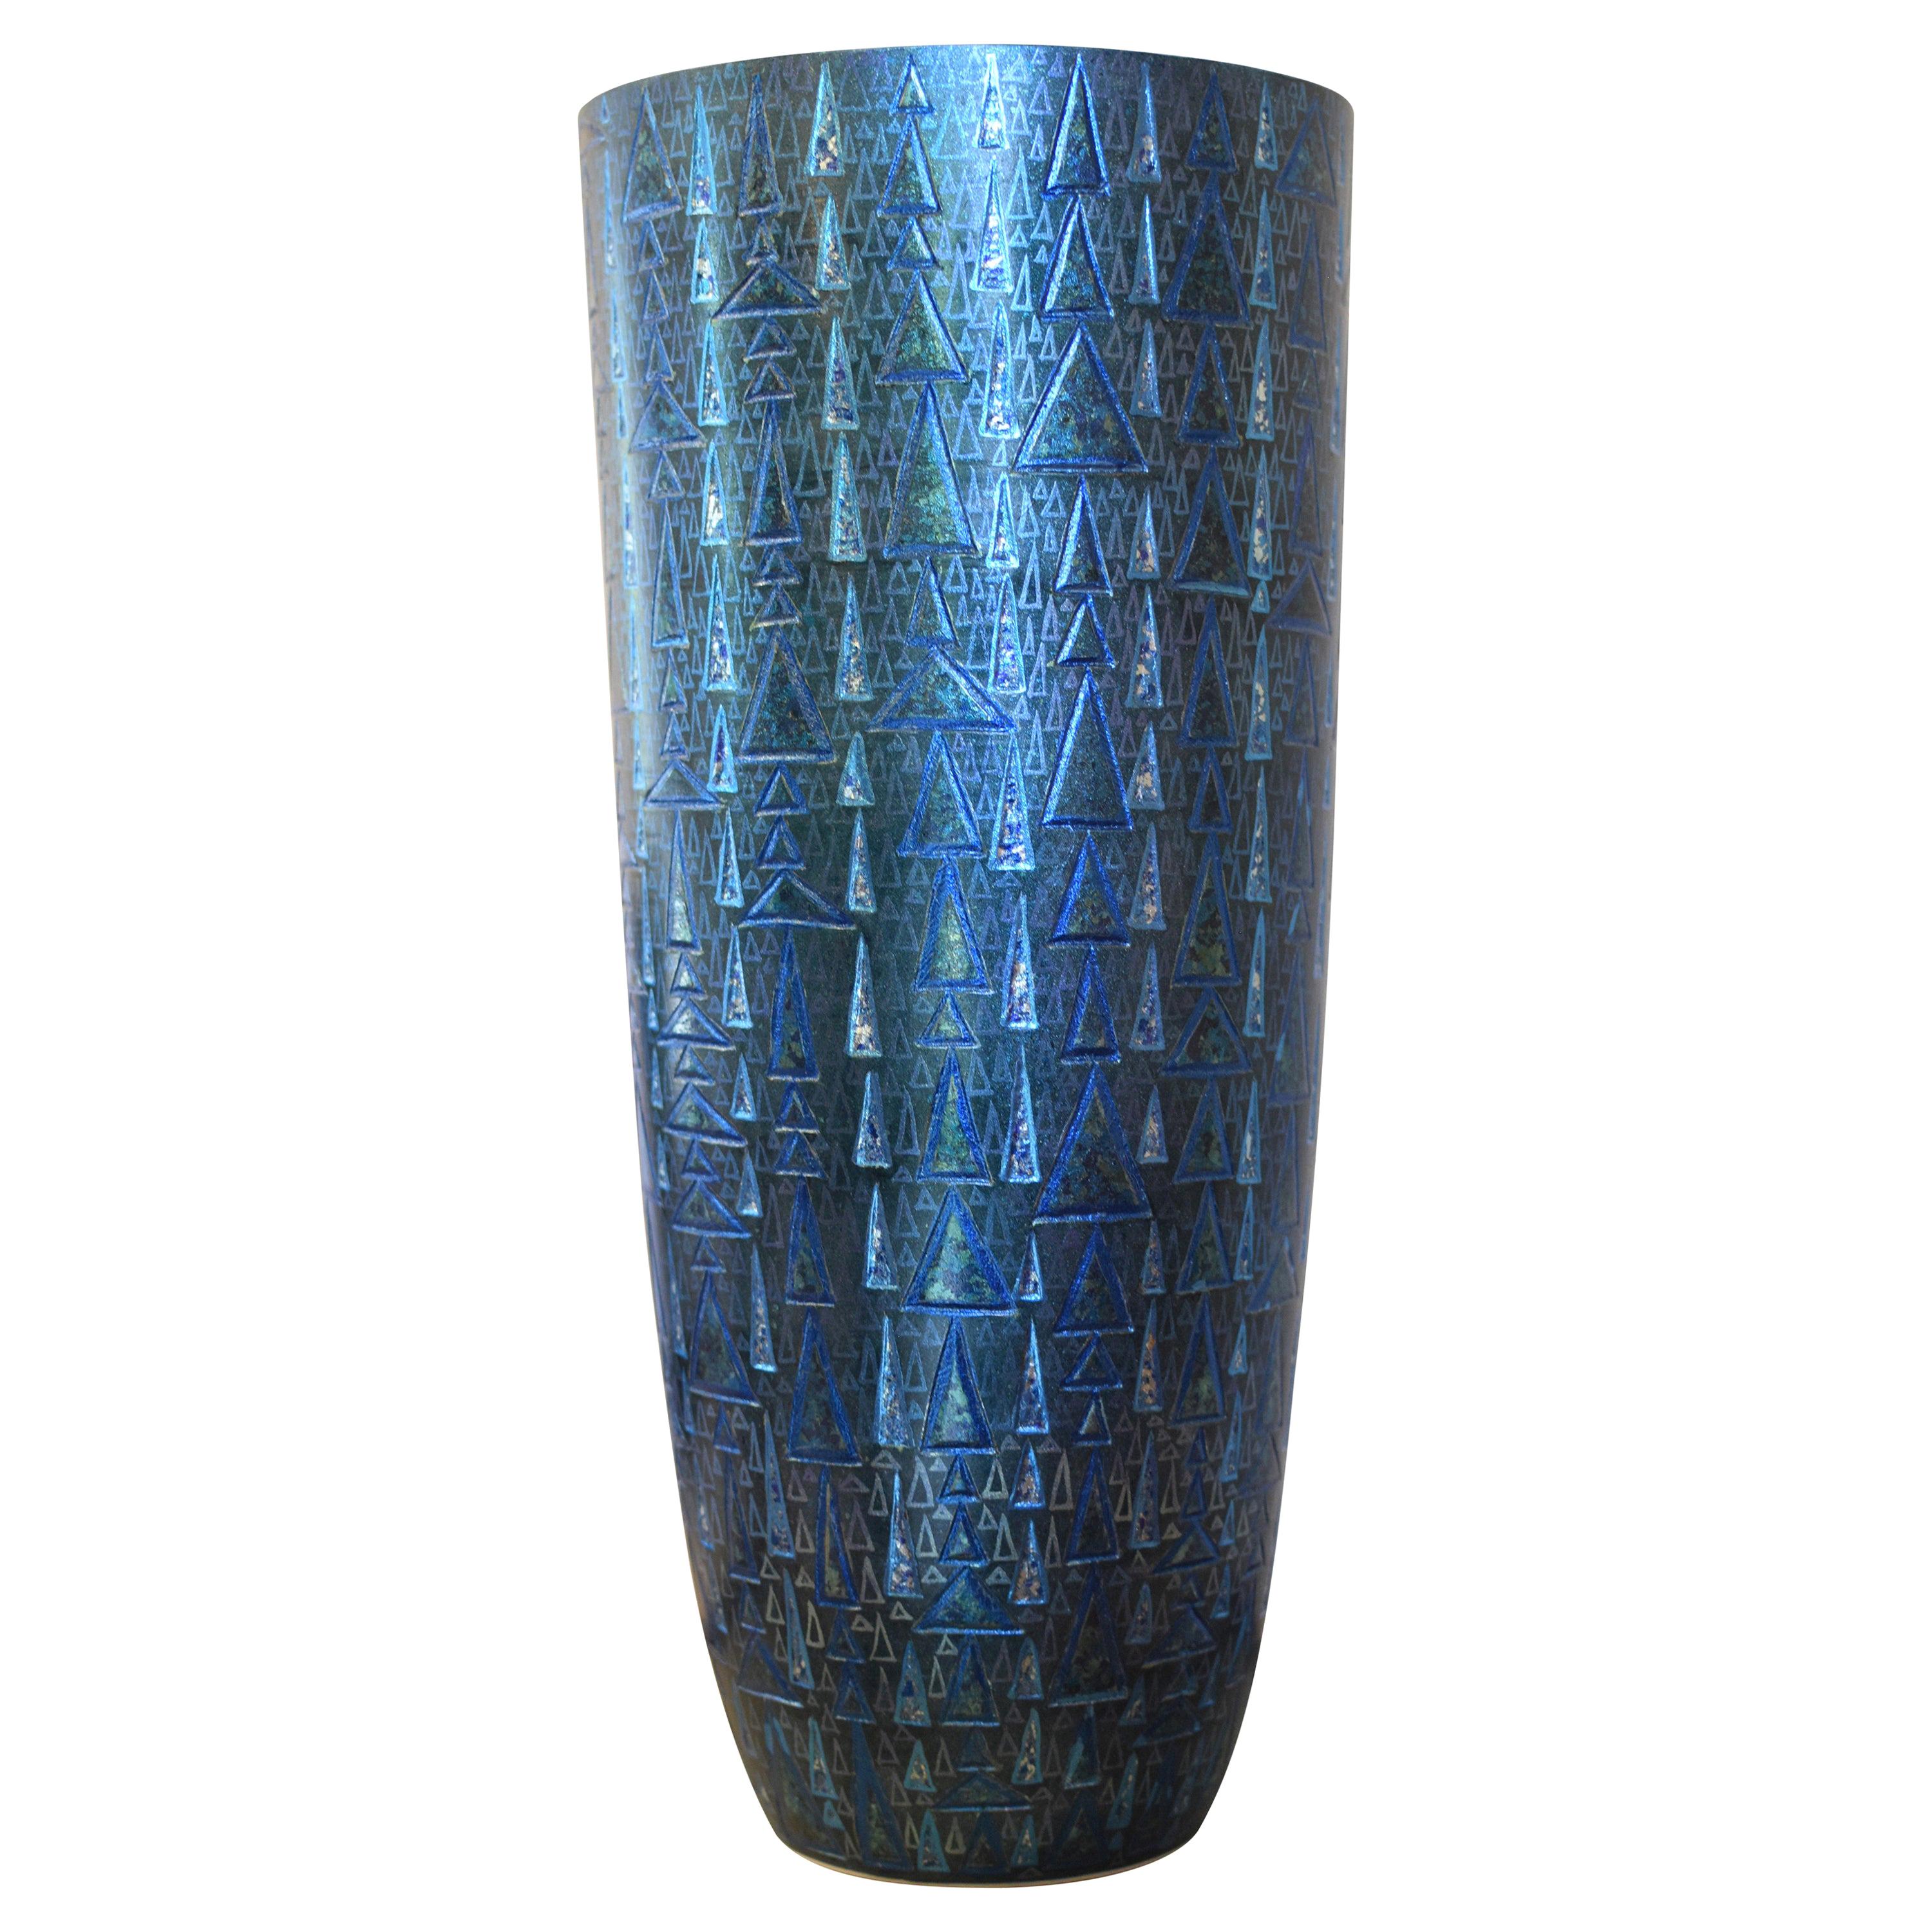 Japanese Contemporary Blue Silver Etched Porcelain Vase by Master Artist For Sale